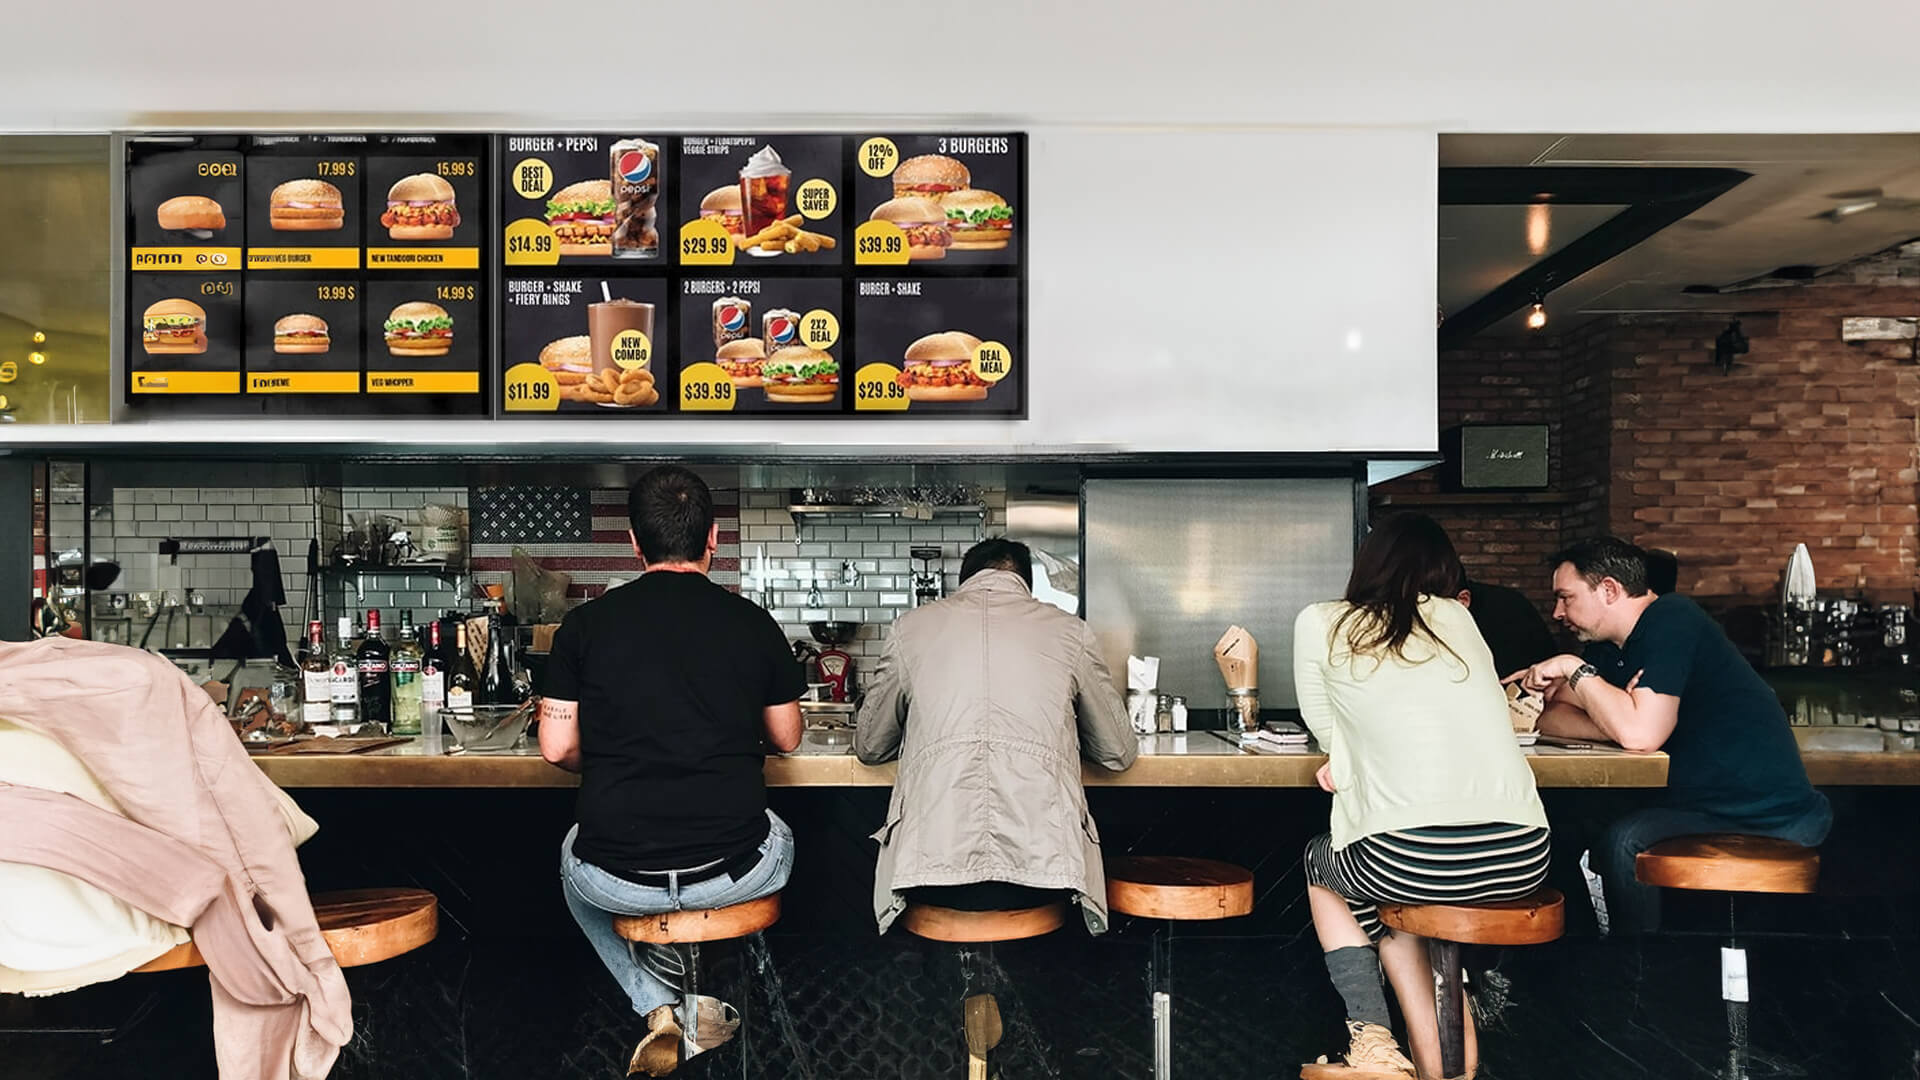 The rise of fast food signage in the QSR industry.